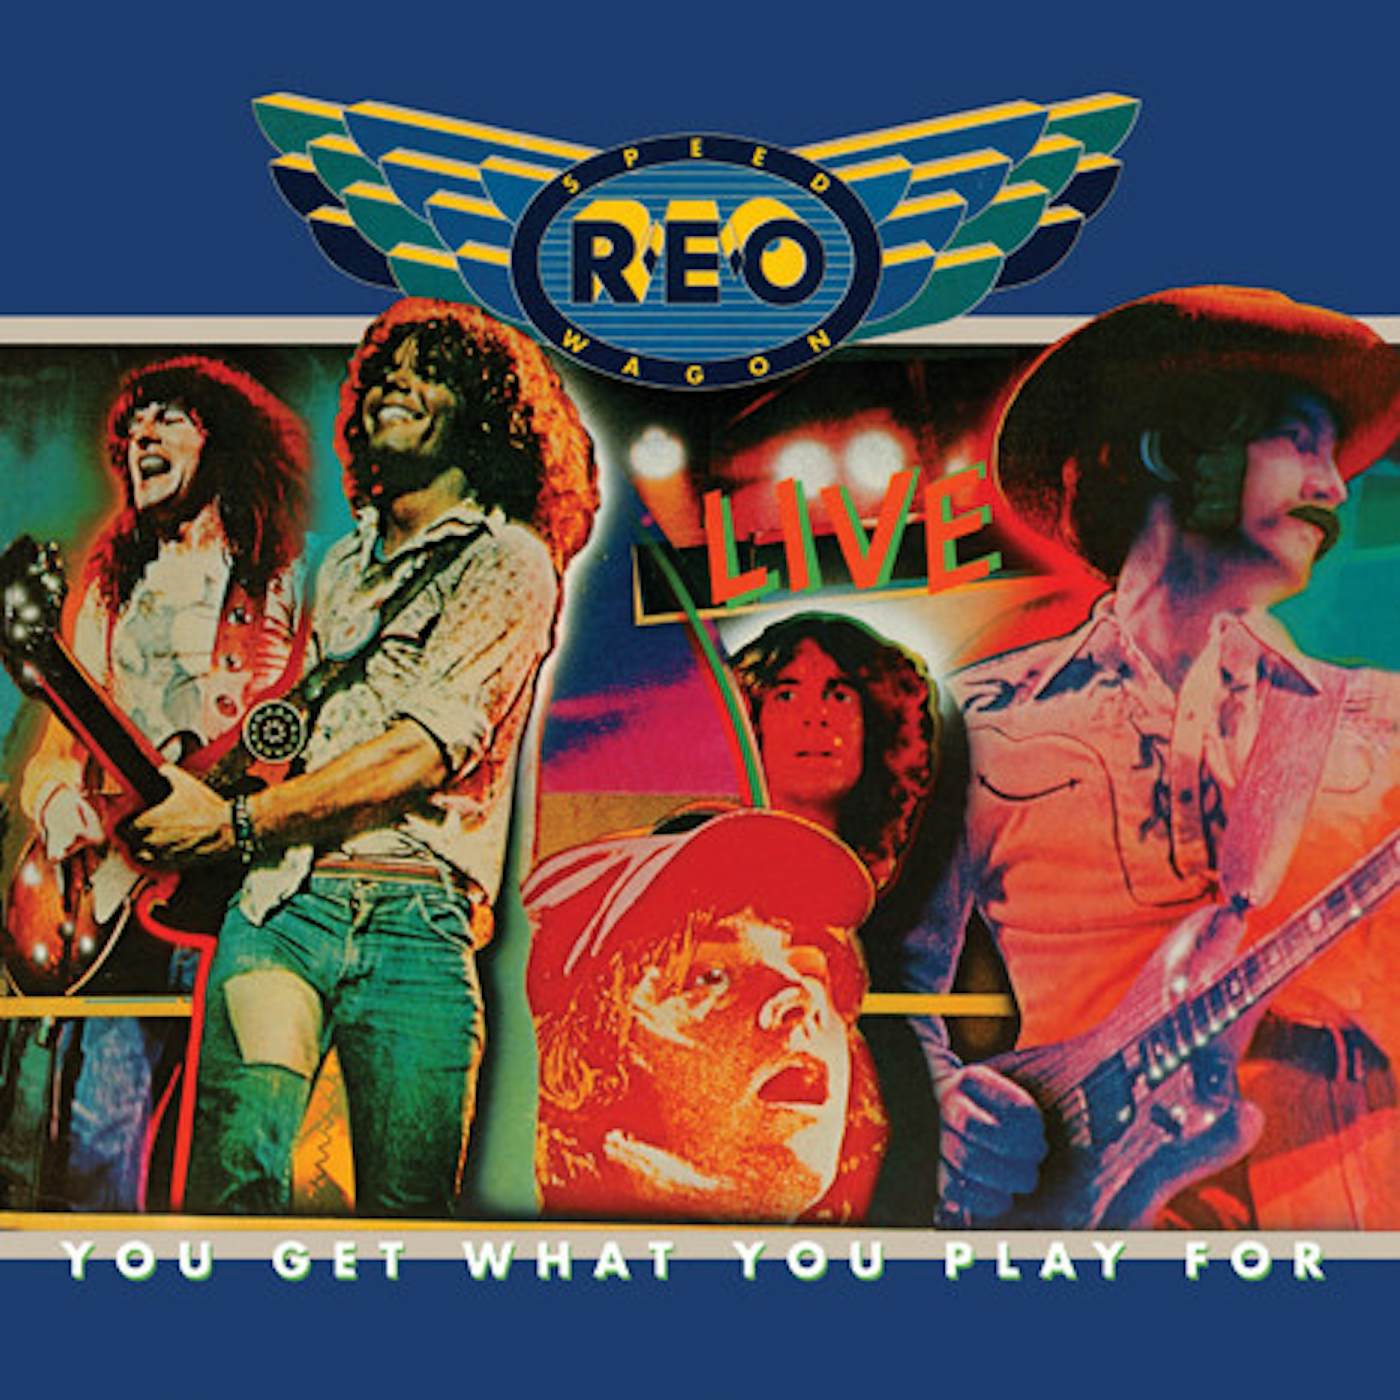 REO Speedwagon You Get What You Play For Vinyl Record